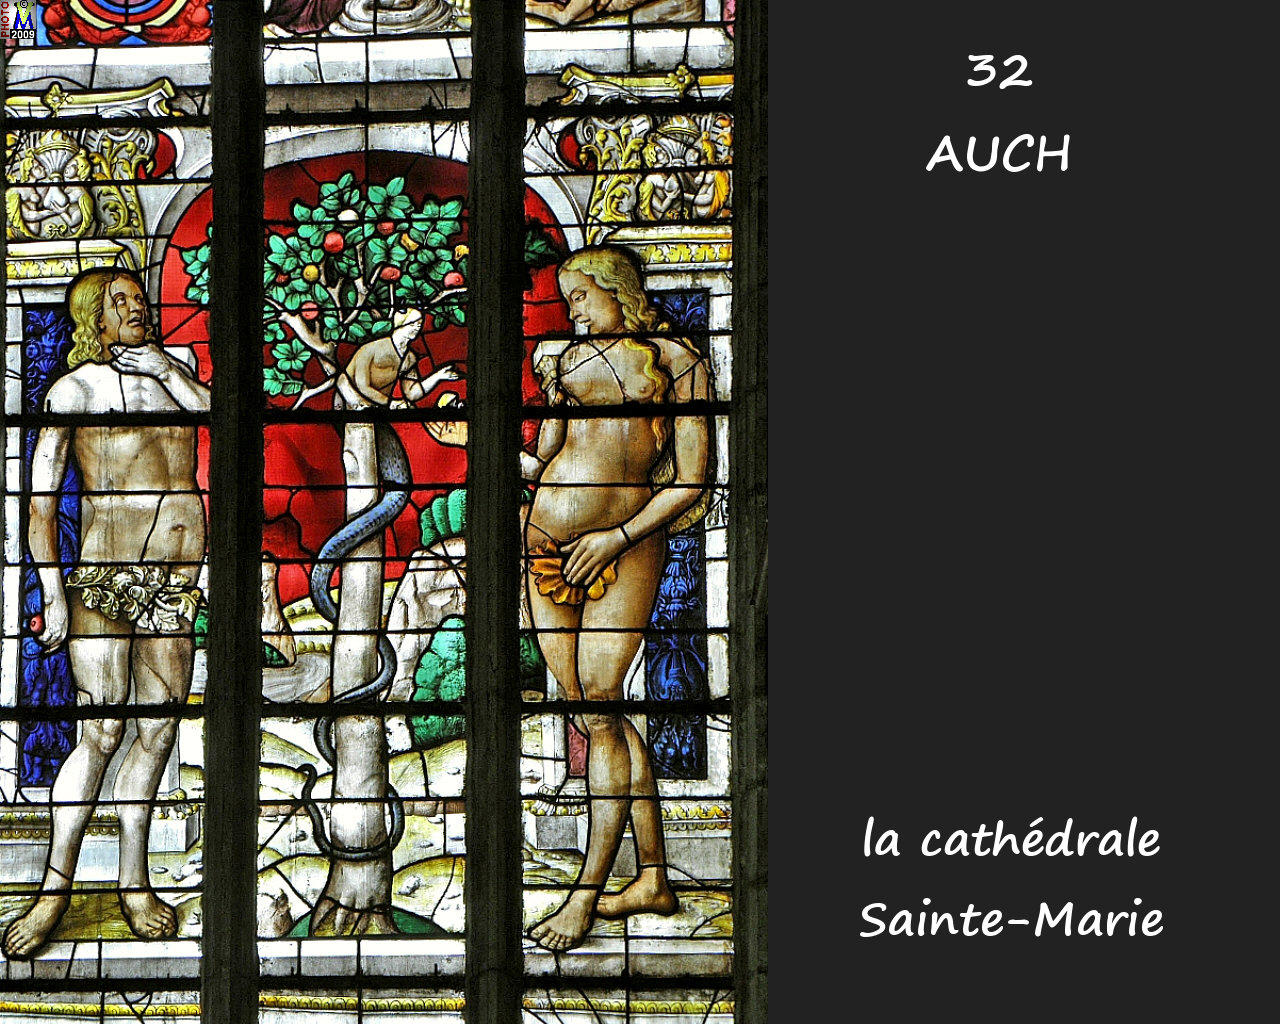 32AUCH_cathedrale_210.jpg